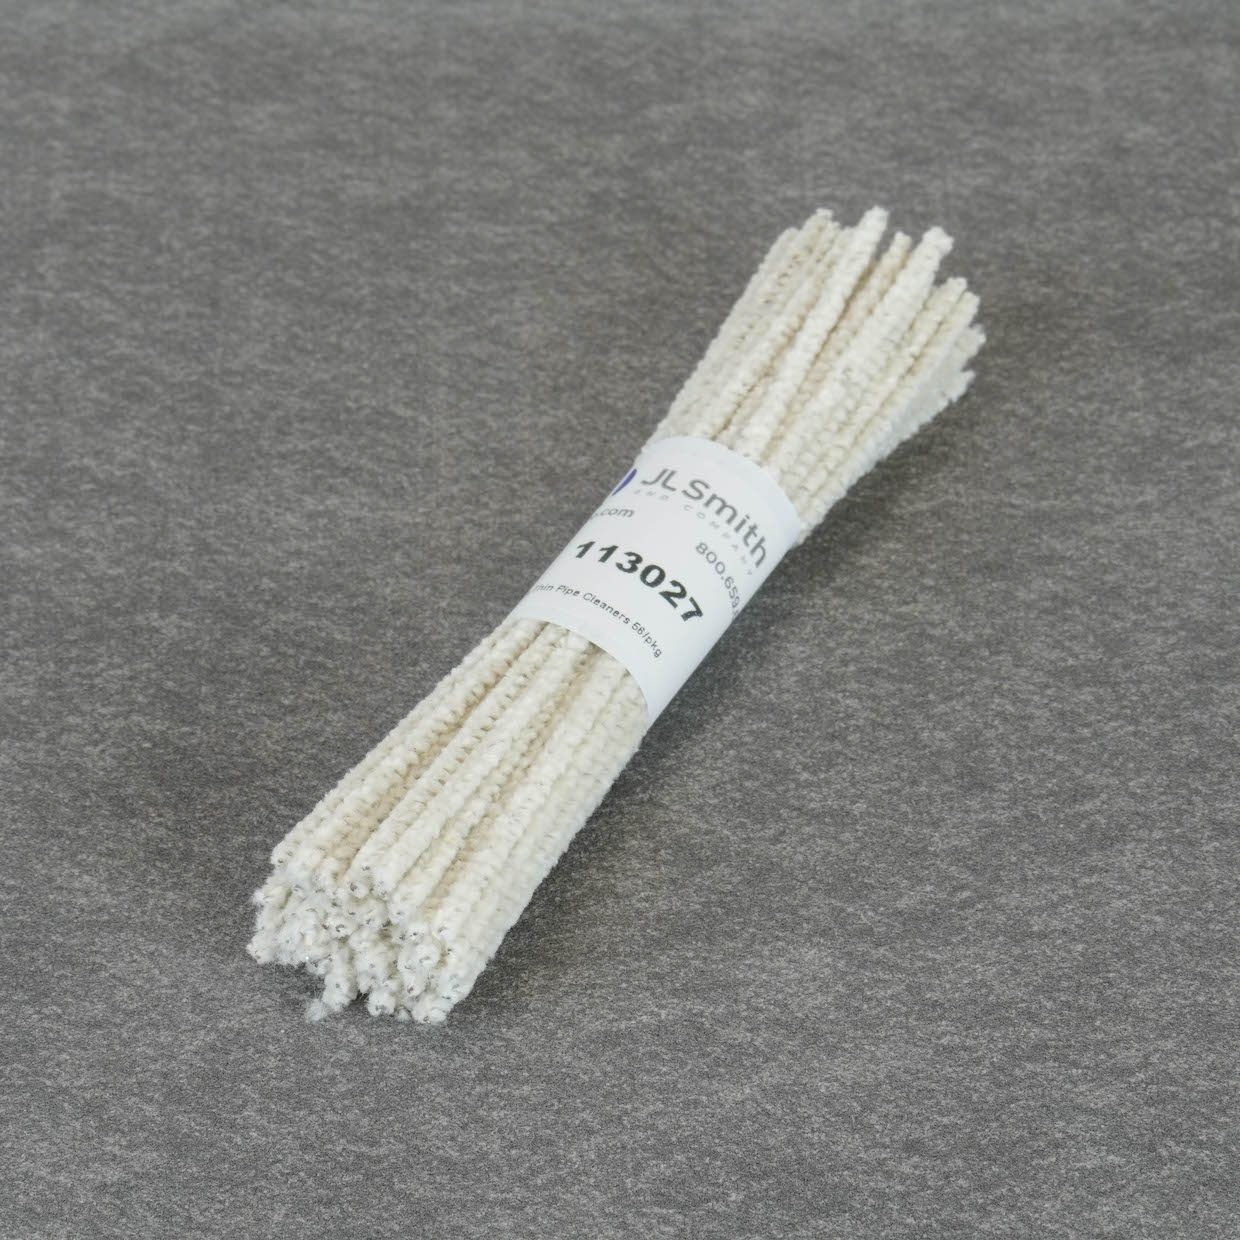 Extra Thin Pipe Cleaners - 56 Pack